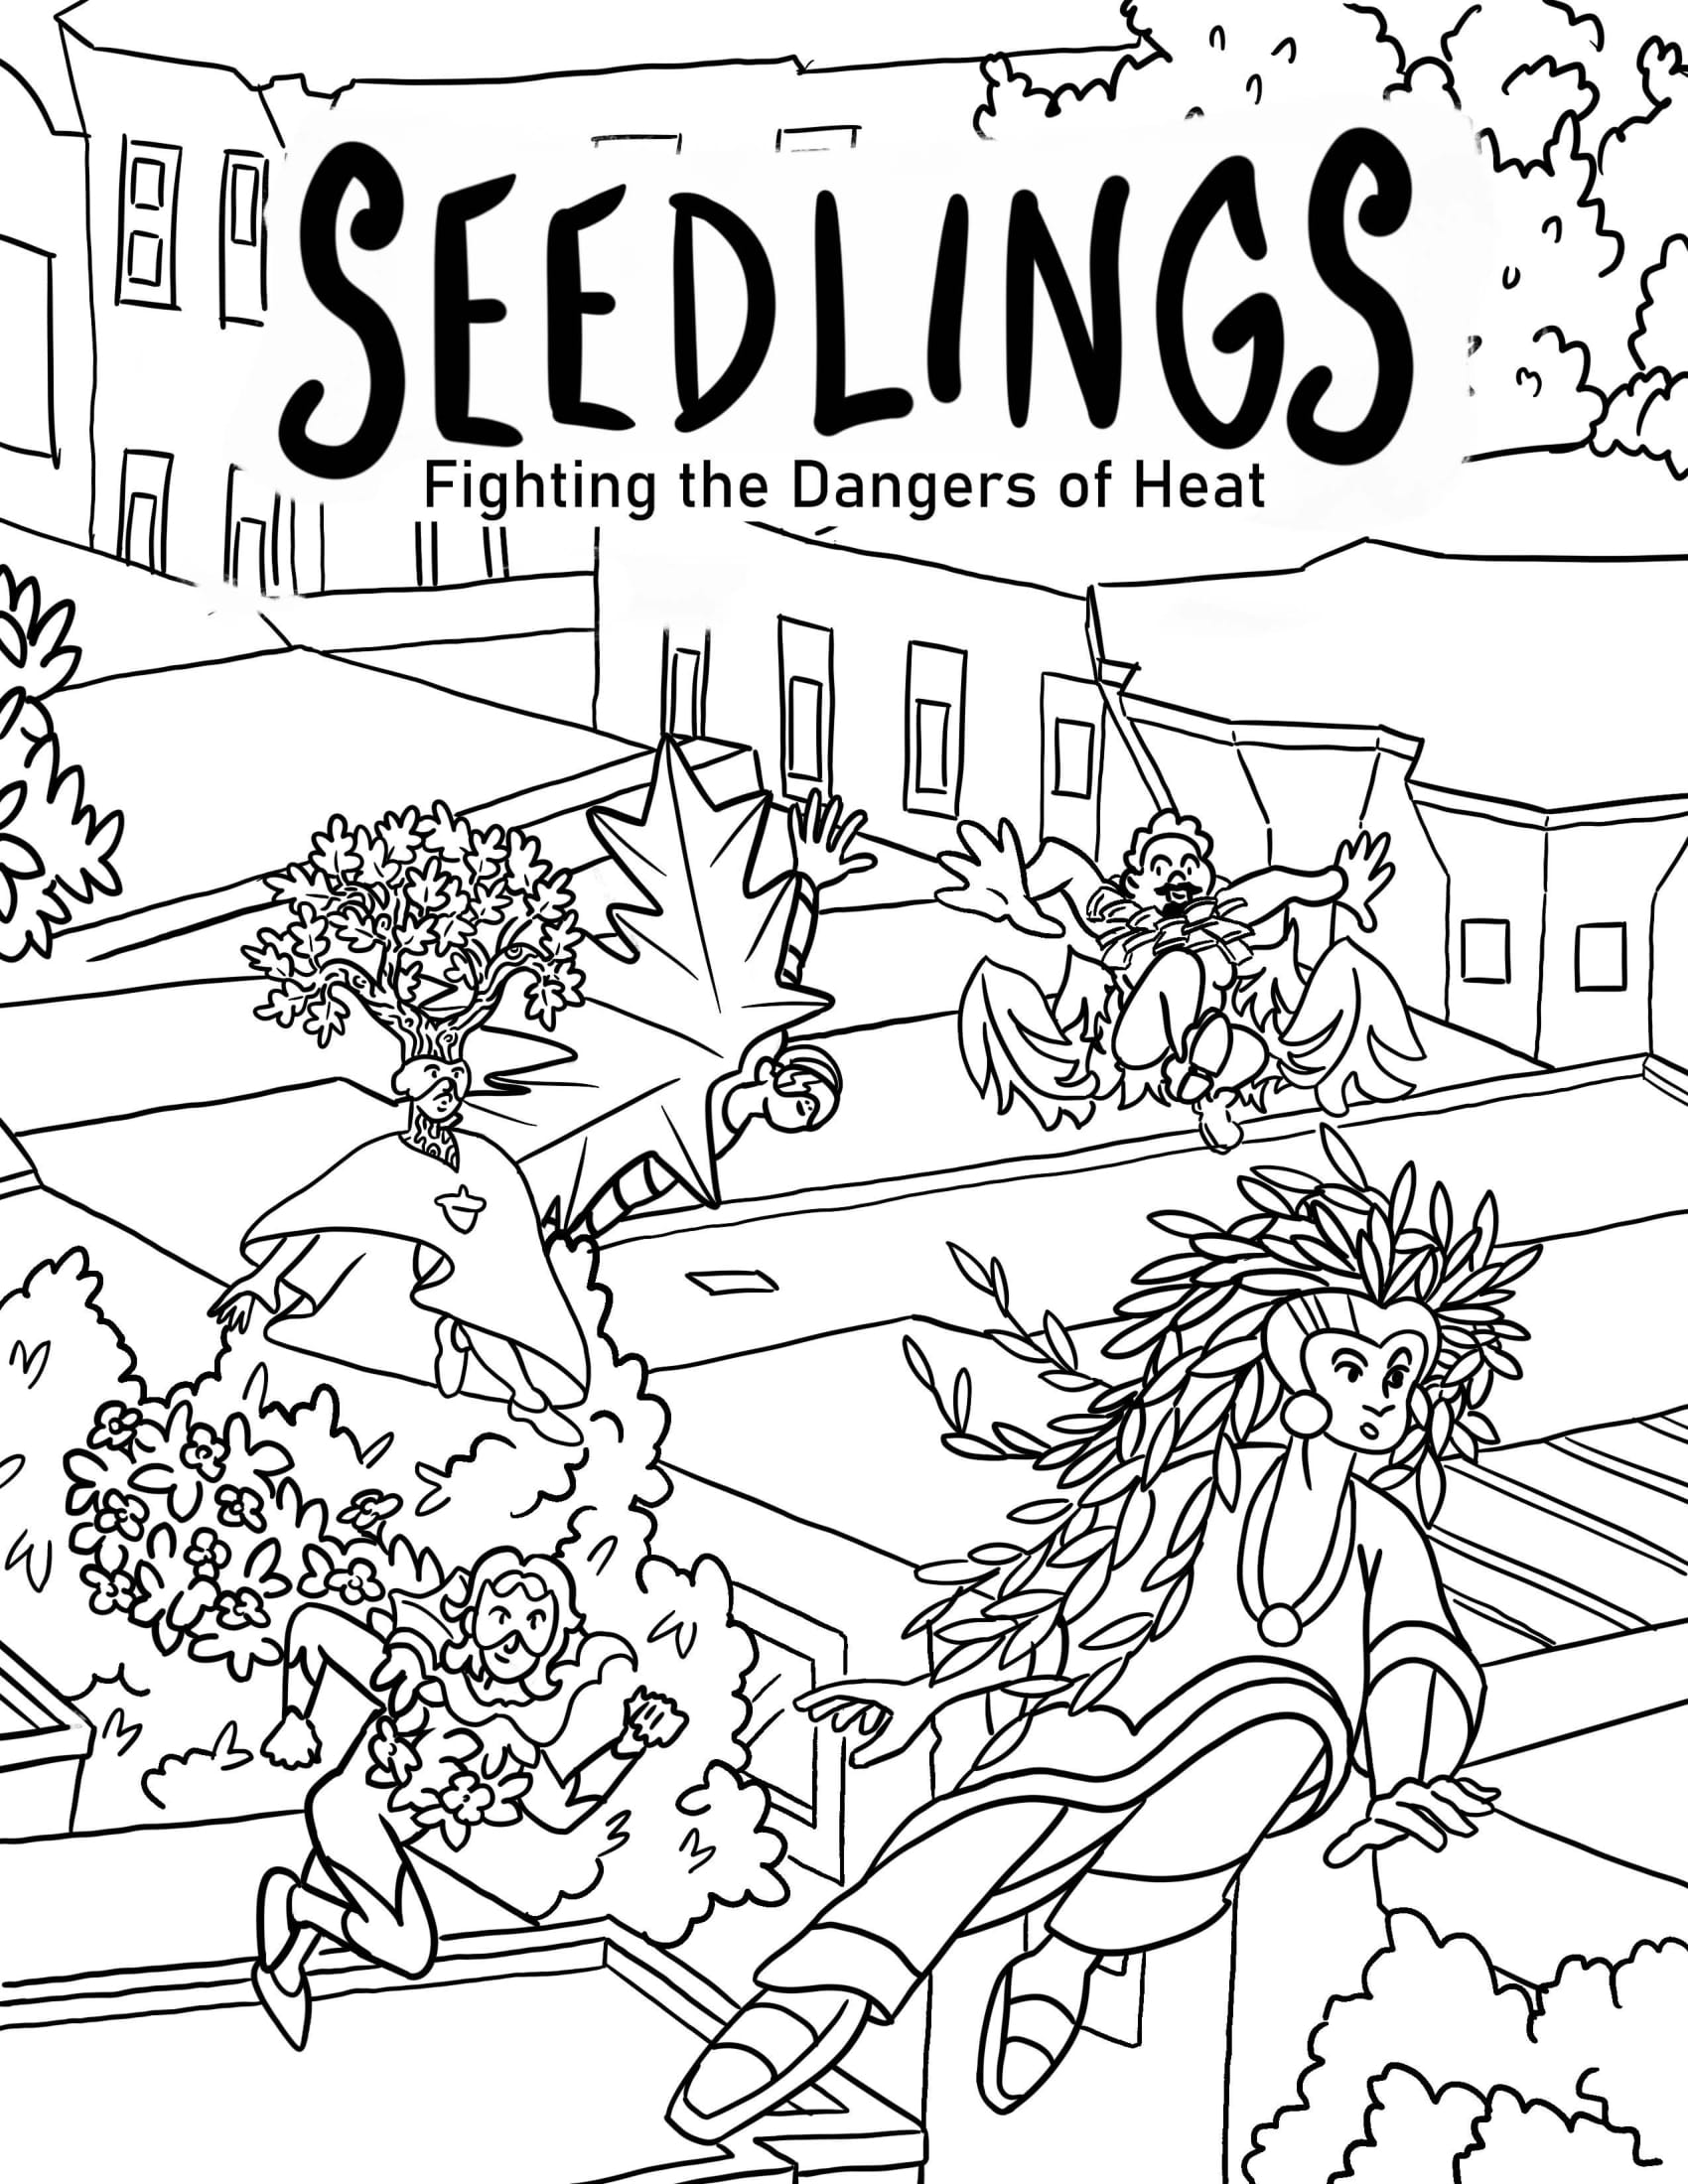 Seedlings coloring book featured image